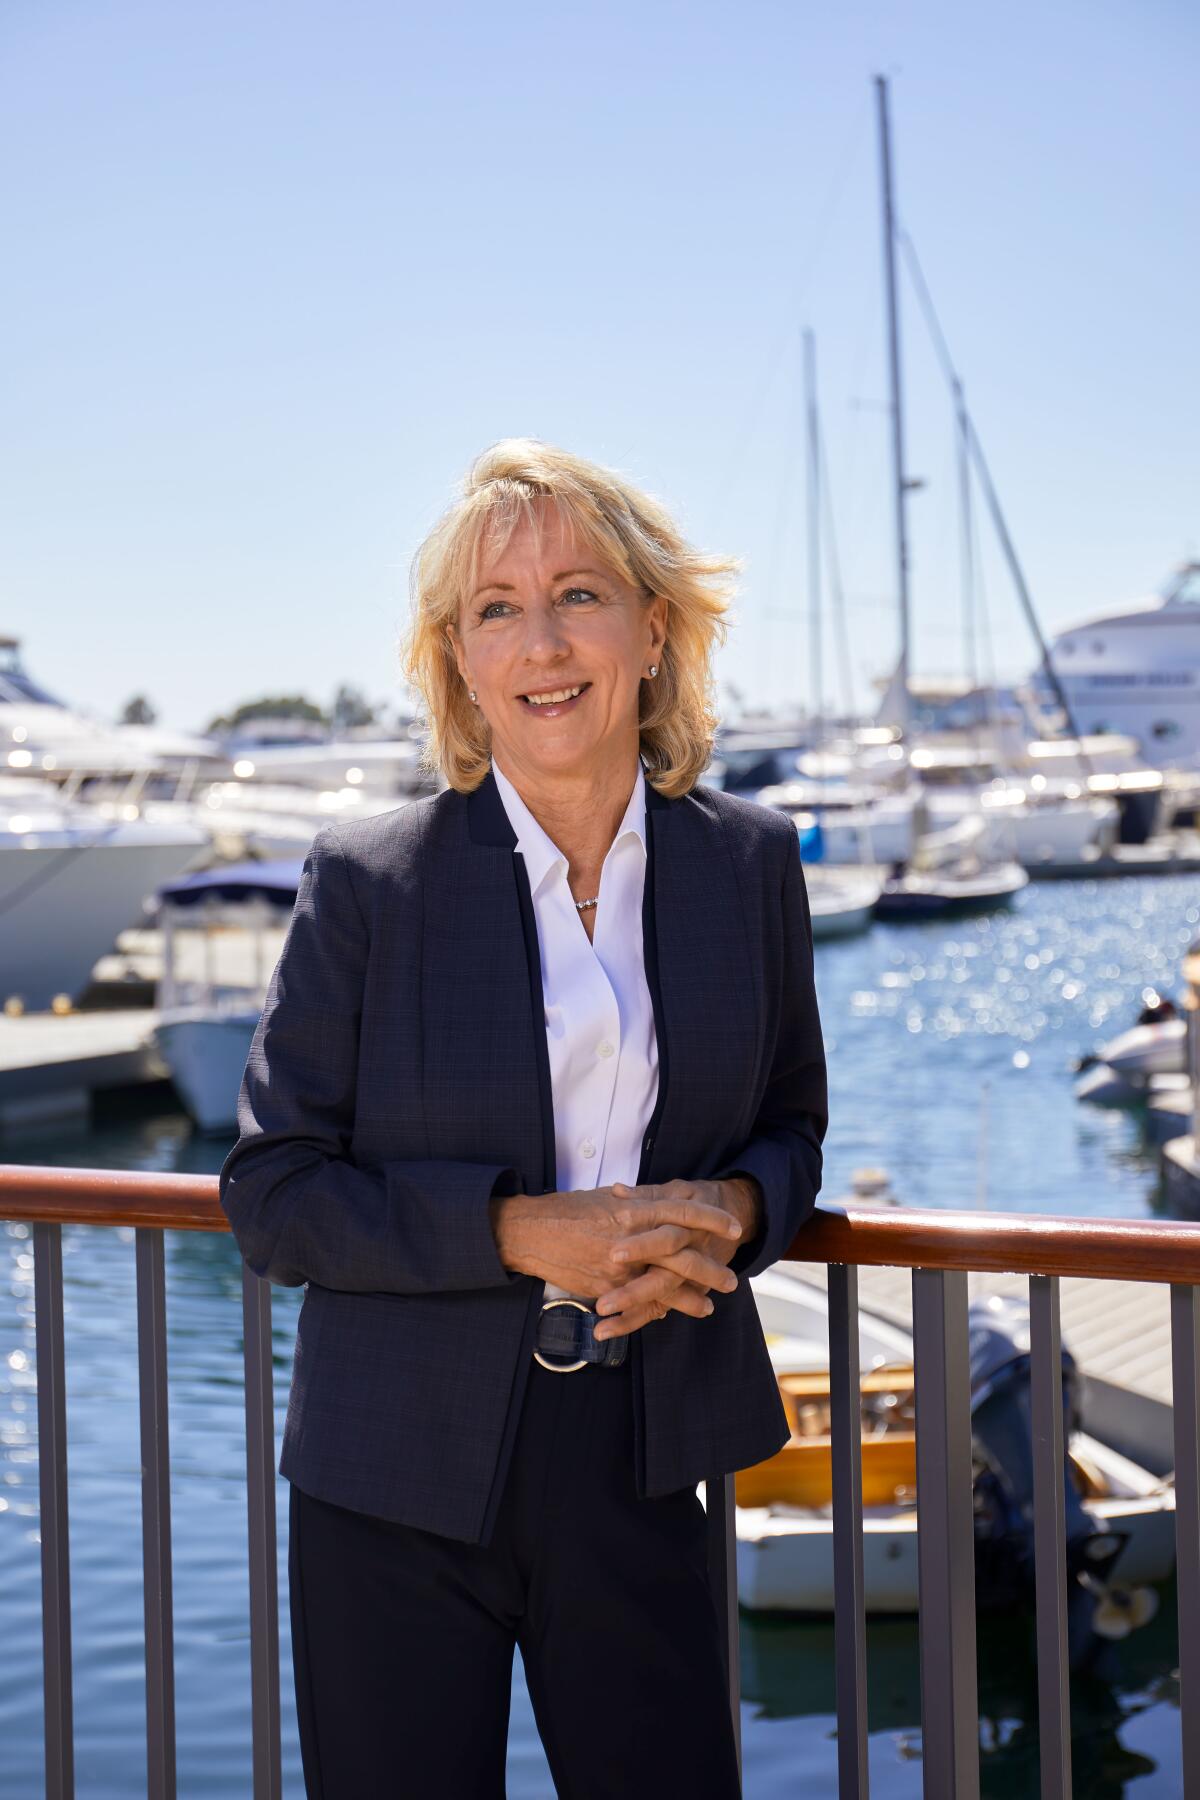 Nancy Scarbrough said she will run in District 2 for the Newport Beach City Council.